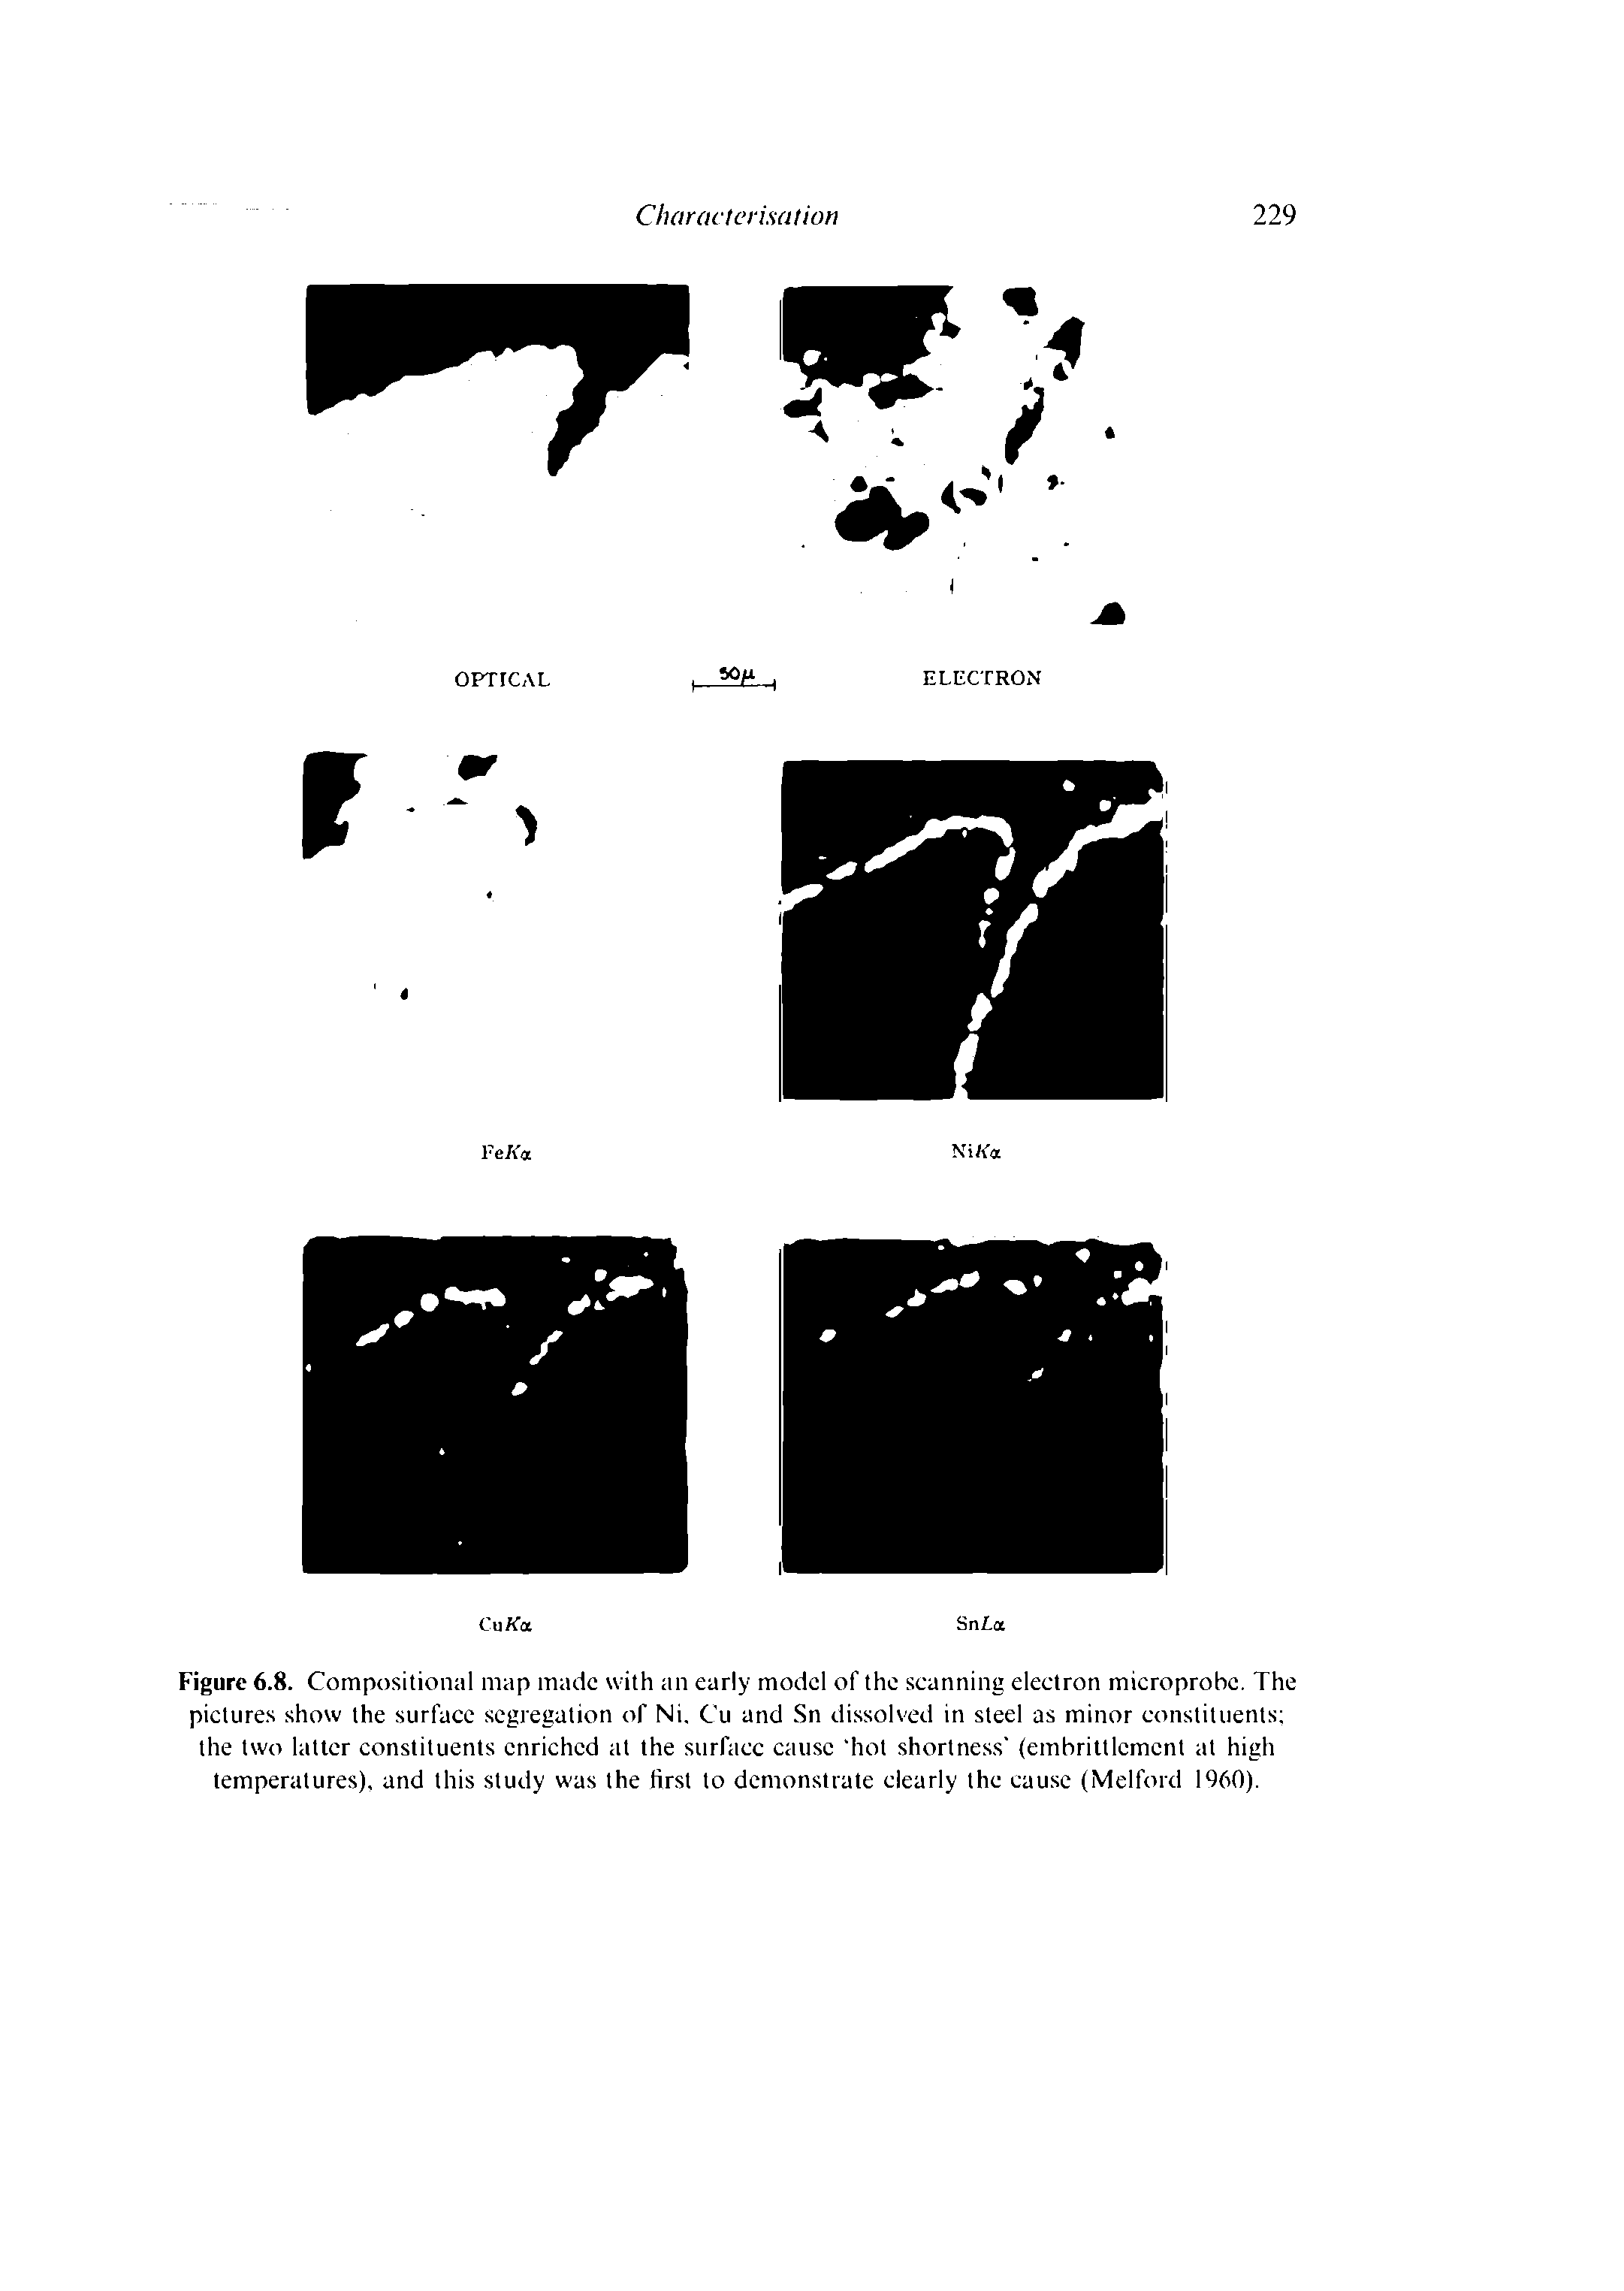 Figure 6.8. Compositional map made with an early model of the scanning electron microprobc. The pictures show the surface segregation of Ni. Cu and Sn dissolved in steel as minor constituents the two latter constituents enriched at the surface cause hot shortness (embrittlement at high temperatures), and this study was the first to demonstrate clearly the cause (Melford I960).